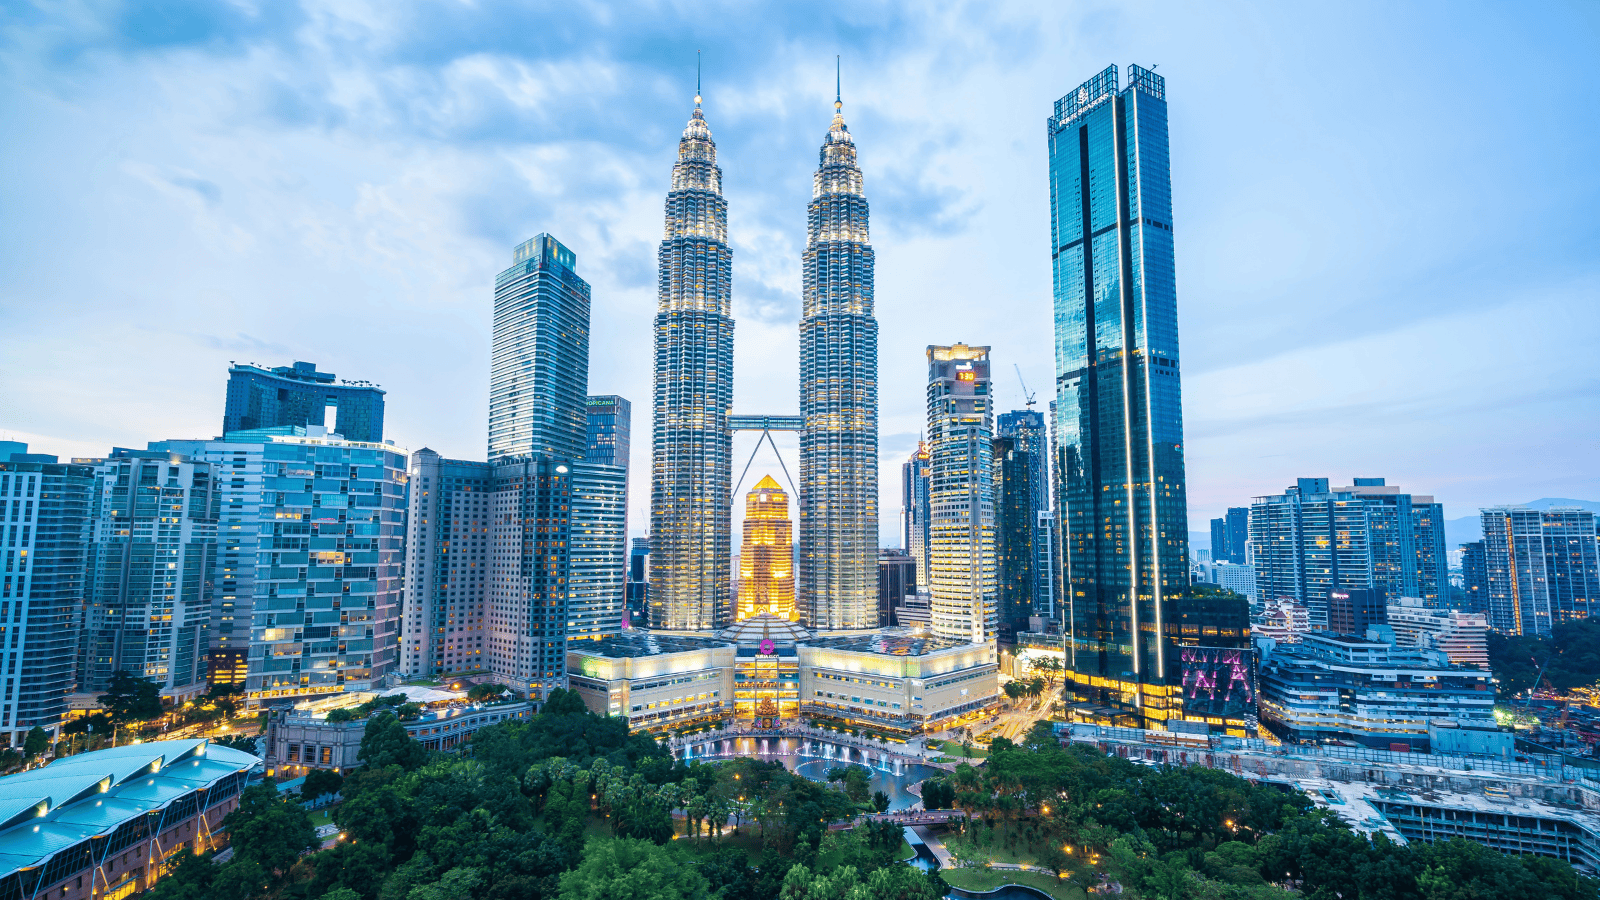 <p>Malaysia’s largest city, Kuala Lumpur, is worth adding to your bucket list. Sky-high buildings and observation decks dominate this bustling urban area. Food lovers should visit this <a href="https://whatthefab.com/21-indulgent-cities-in-asia-that-make-america-seem-bland.html" rel="follow">indulgent Asian city</a> to sample the local favors.</p><p>Kuala Lumpur is larger and cheaper than Dubai but has a distinctly easygoing air. You won’t have to sacrifice comfort or luxury in Kuala Lumpur.</p>